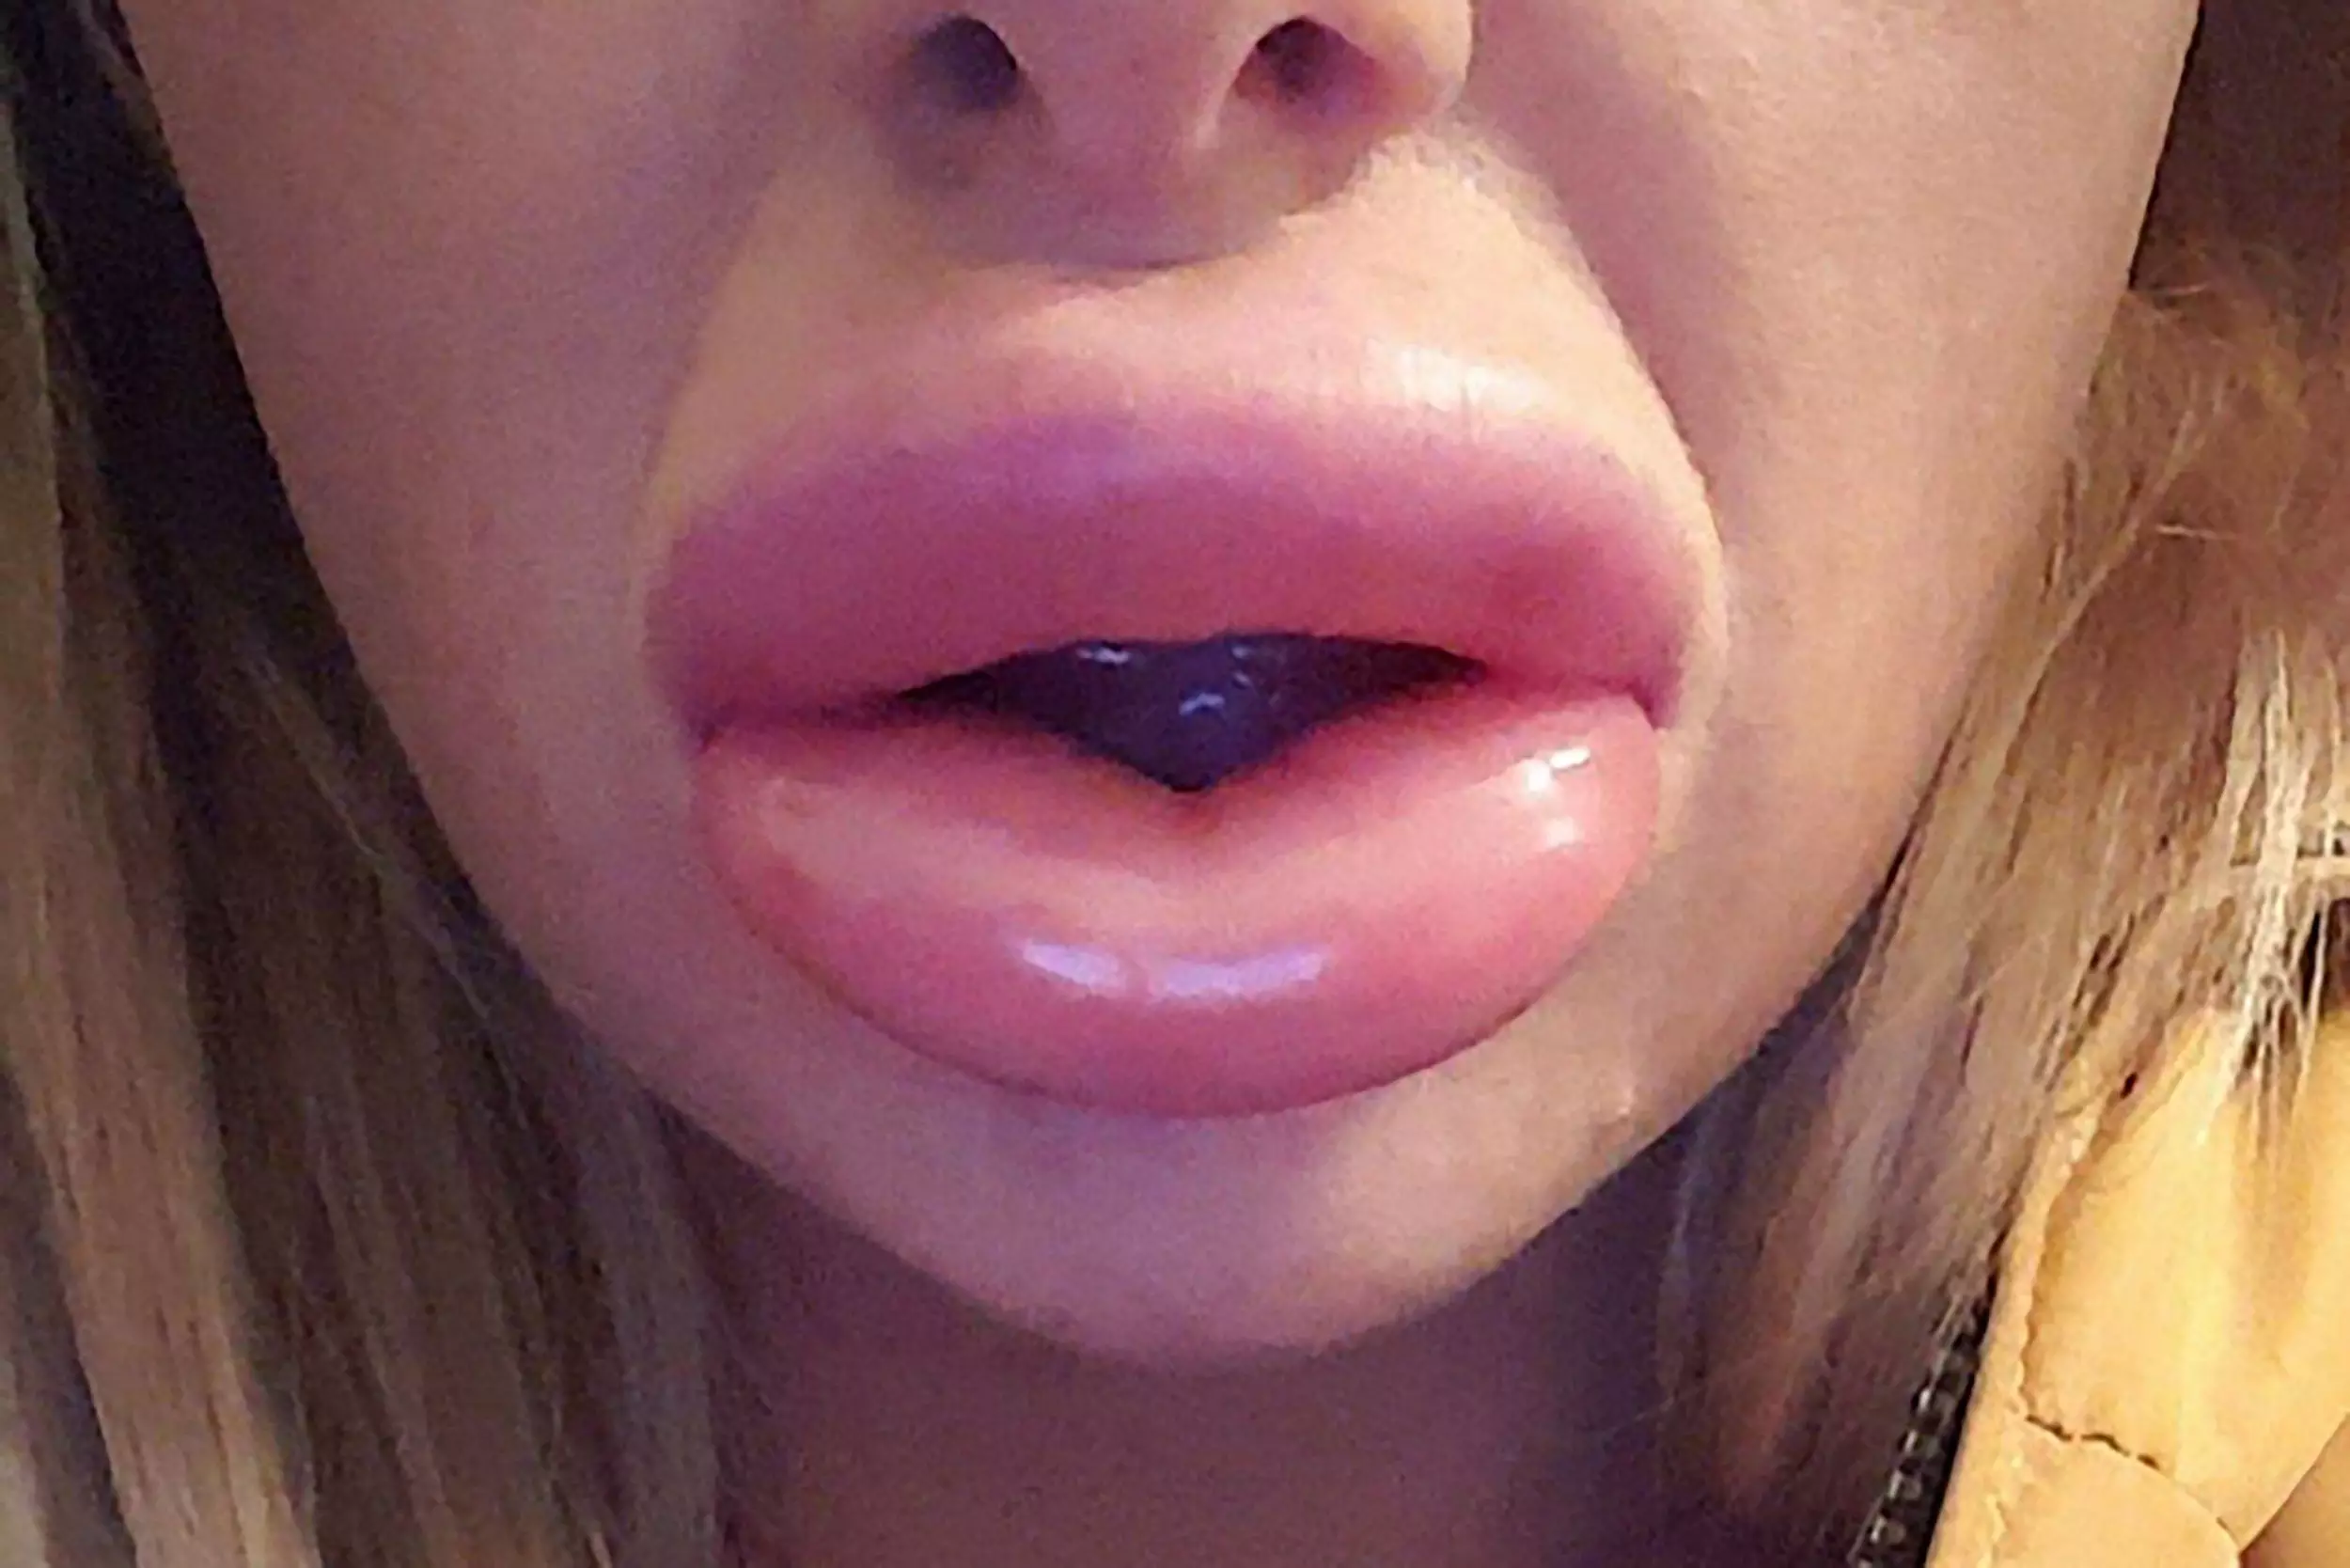 Lip Filler Botch-Job Leaves Woman With 'Two Raw Sausages' For A Mouth